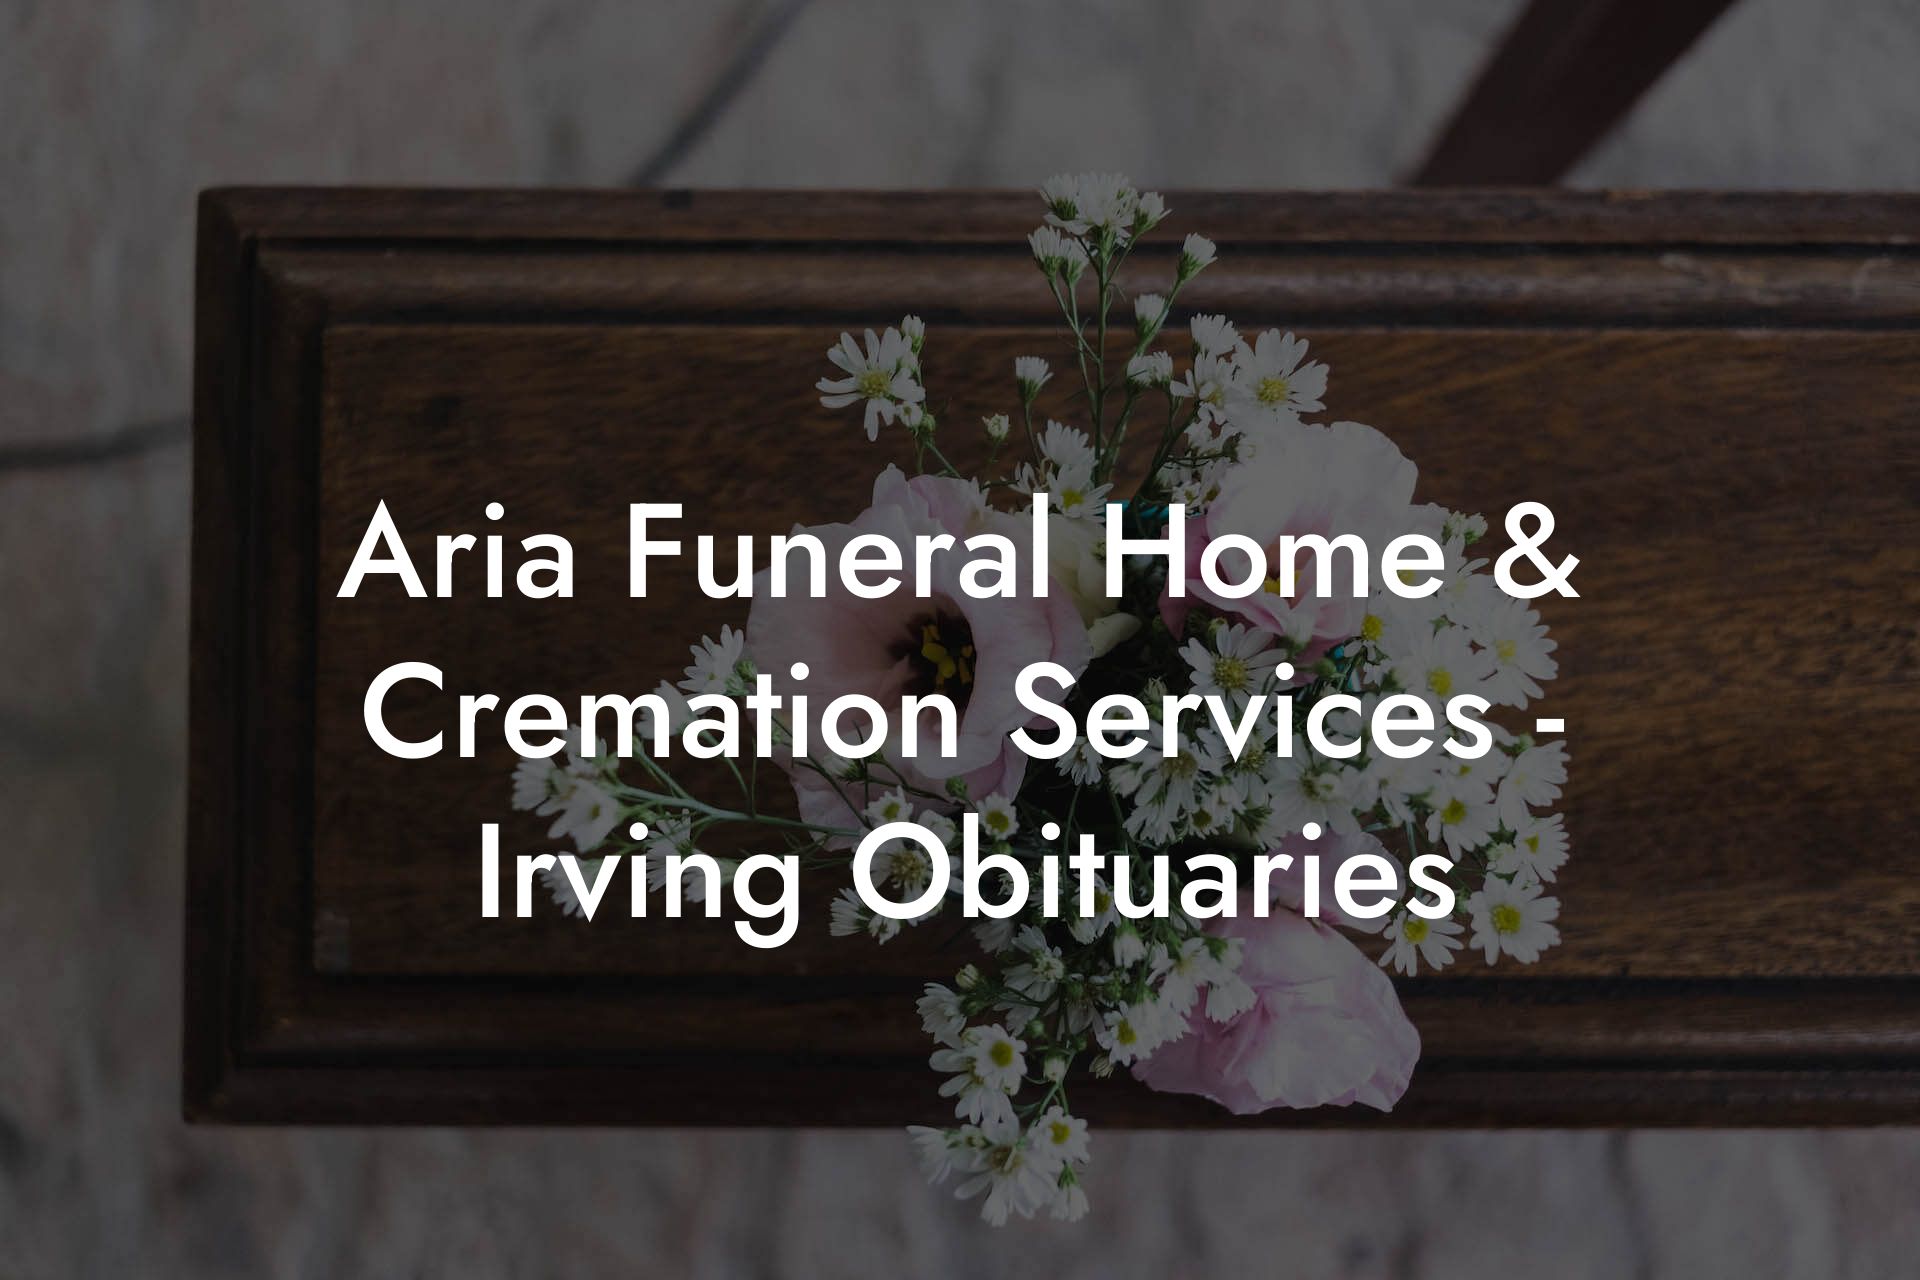 Aria Funeral Home & Cremation Services - Irving Obituaries